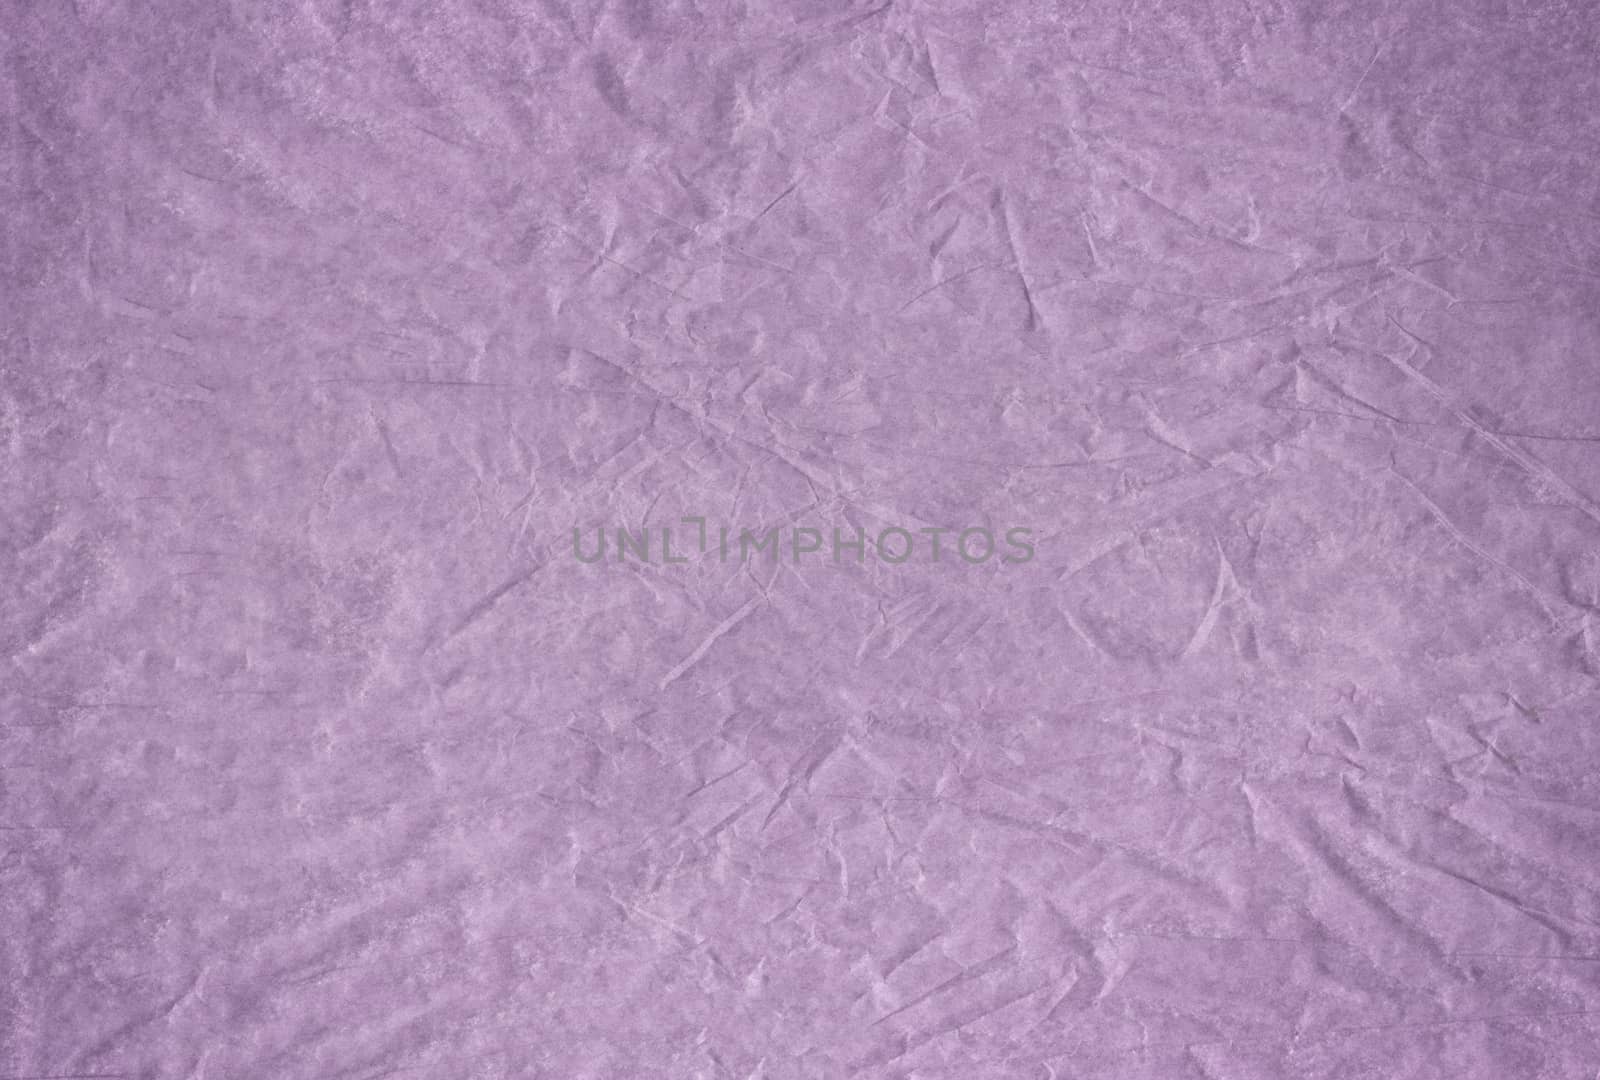 The Purple blank crumpled and grungy textured paper background